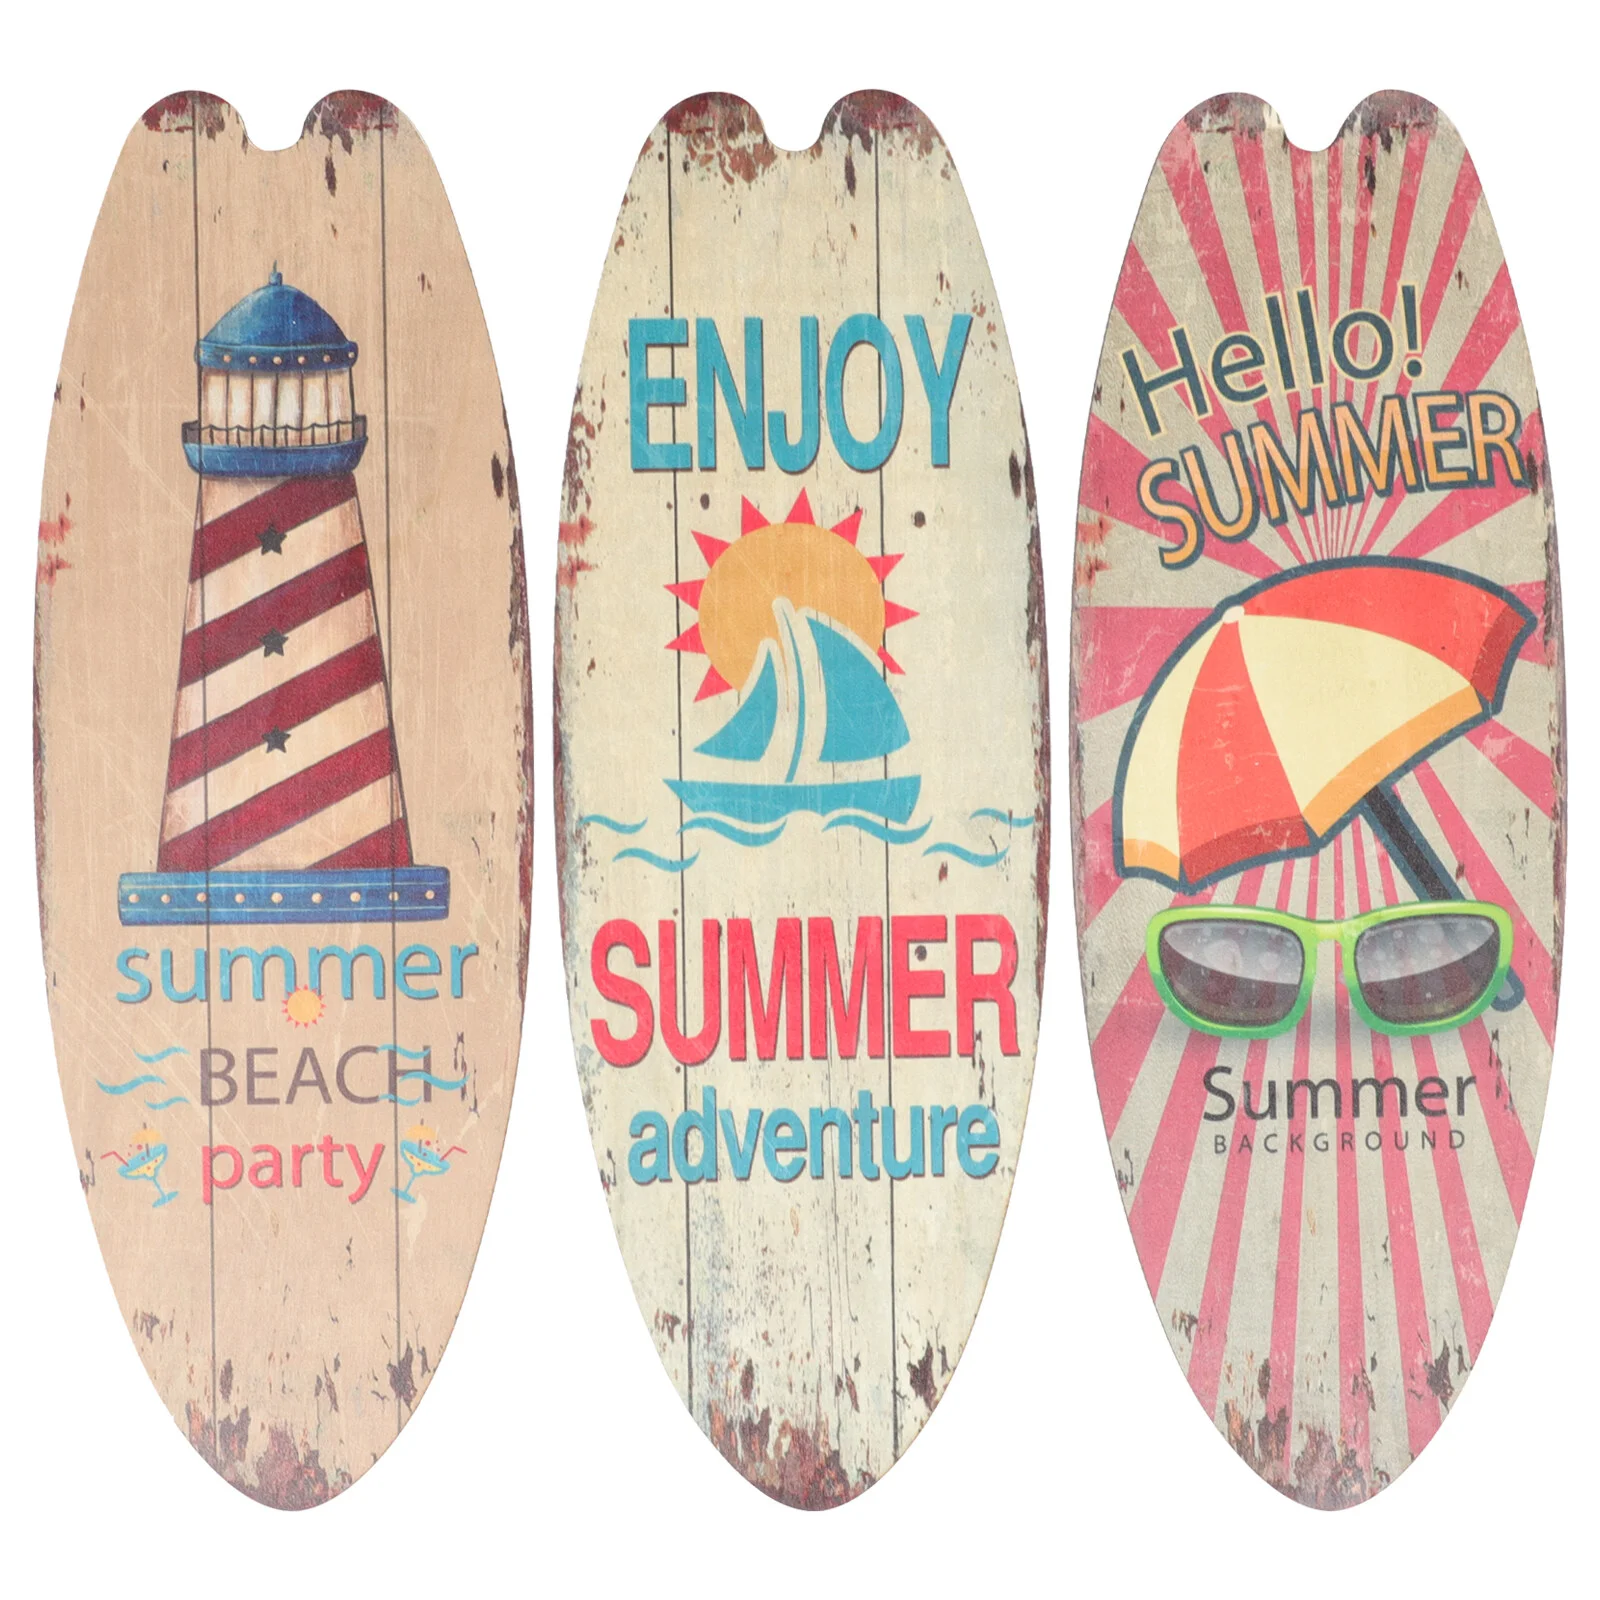 

3 Pcs Summer Beach Hanging Sign Home Ornament Themed Wall Decor Plaque Wood Surfboard Outdoor Decoration Wooden Porch Seaside